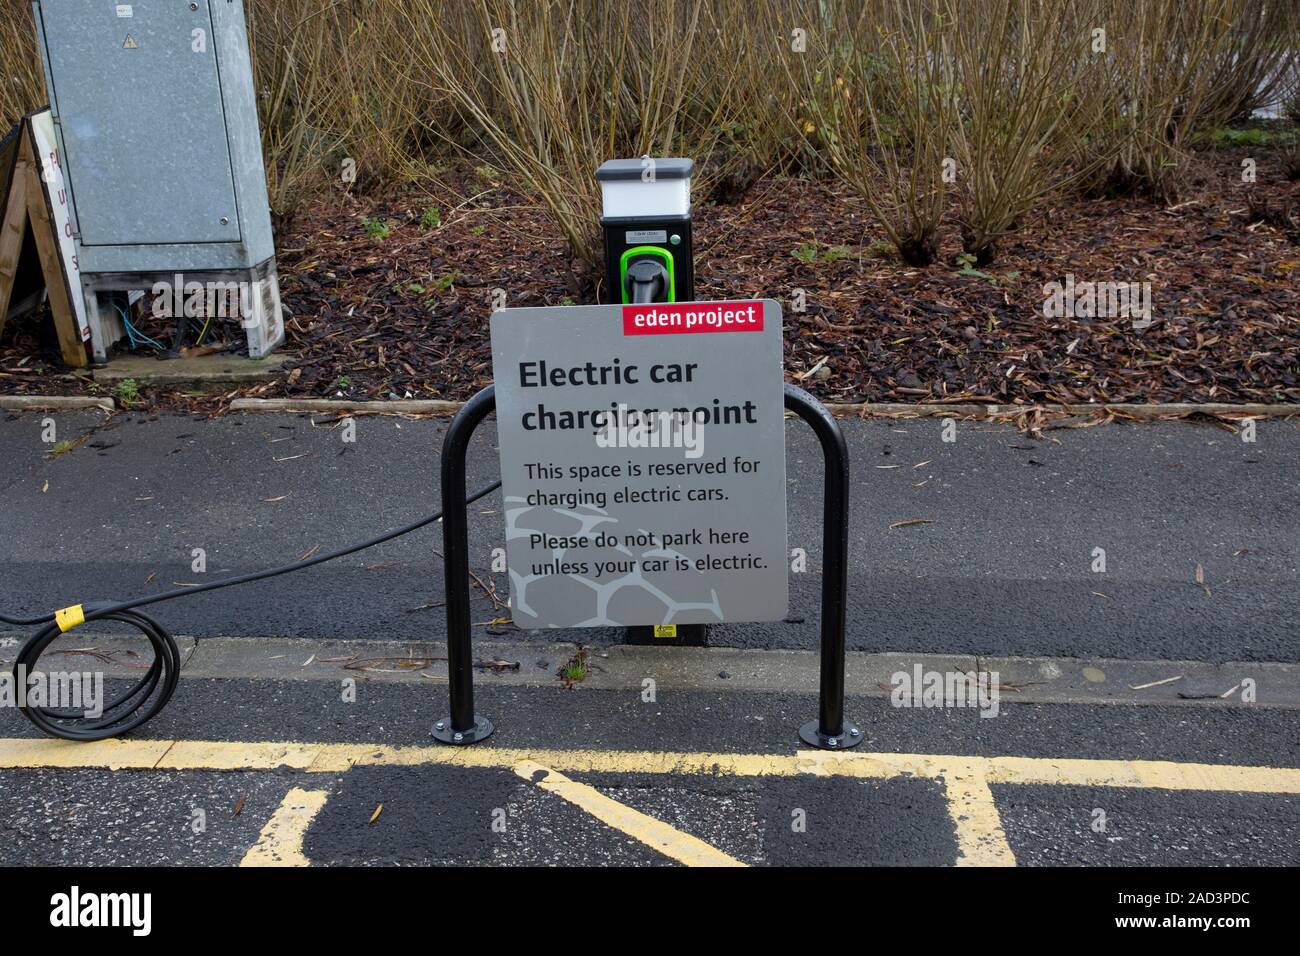 Free-of-charge electric car charging point, Eden Project, Cornwall UK Stock Photo